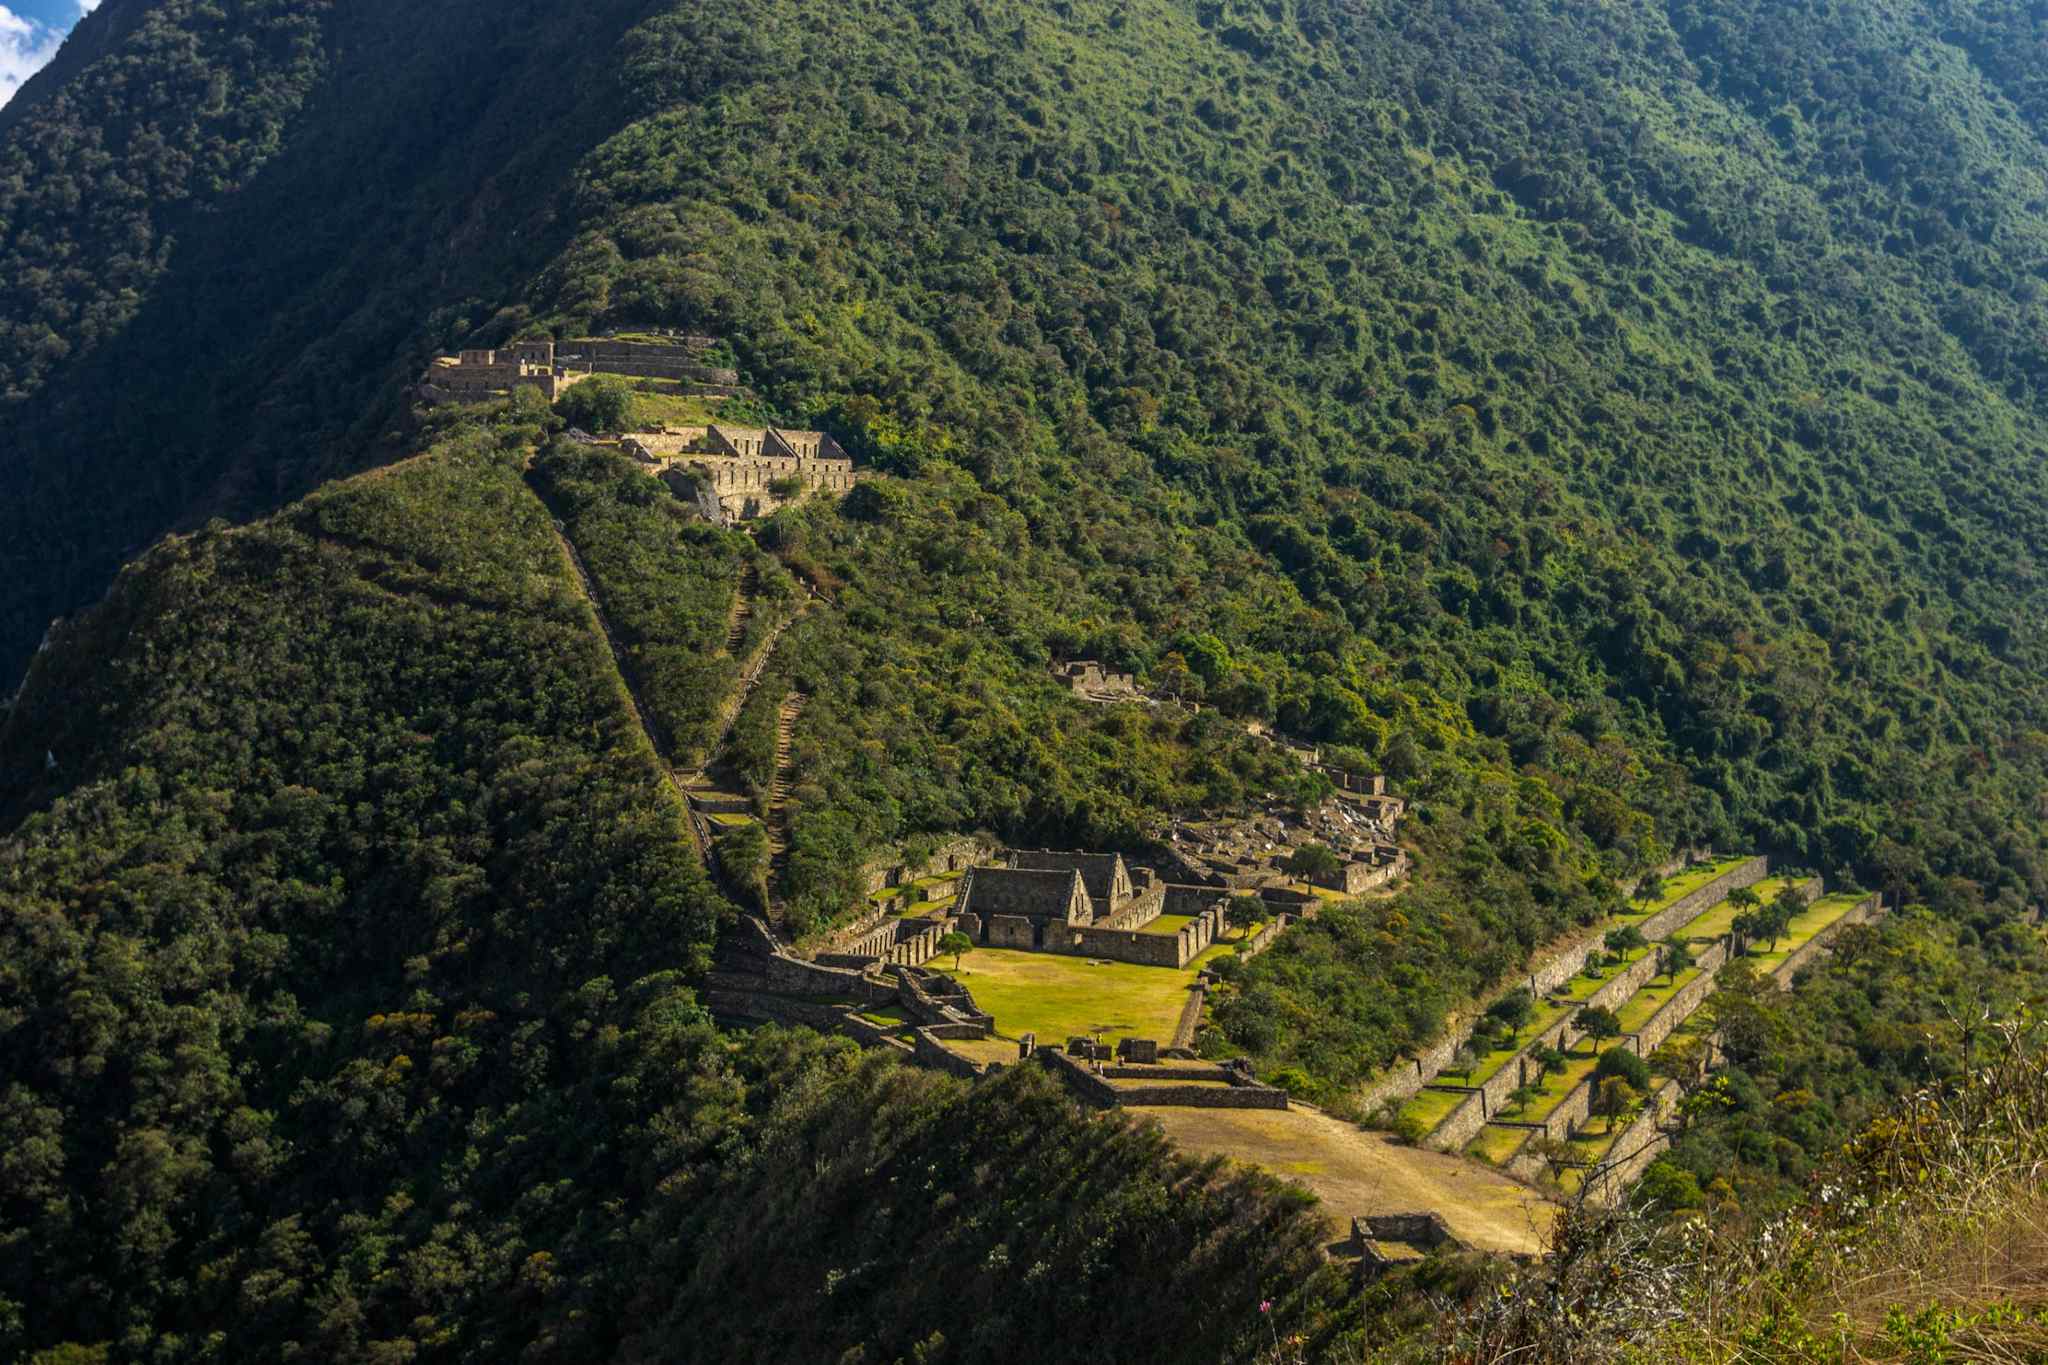 Landscape view of Choquequirao from the trail. Photo: Host/Action Treks Peru